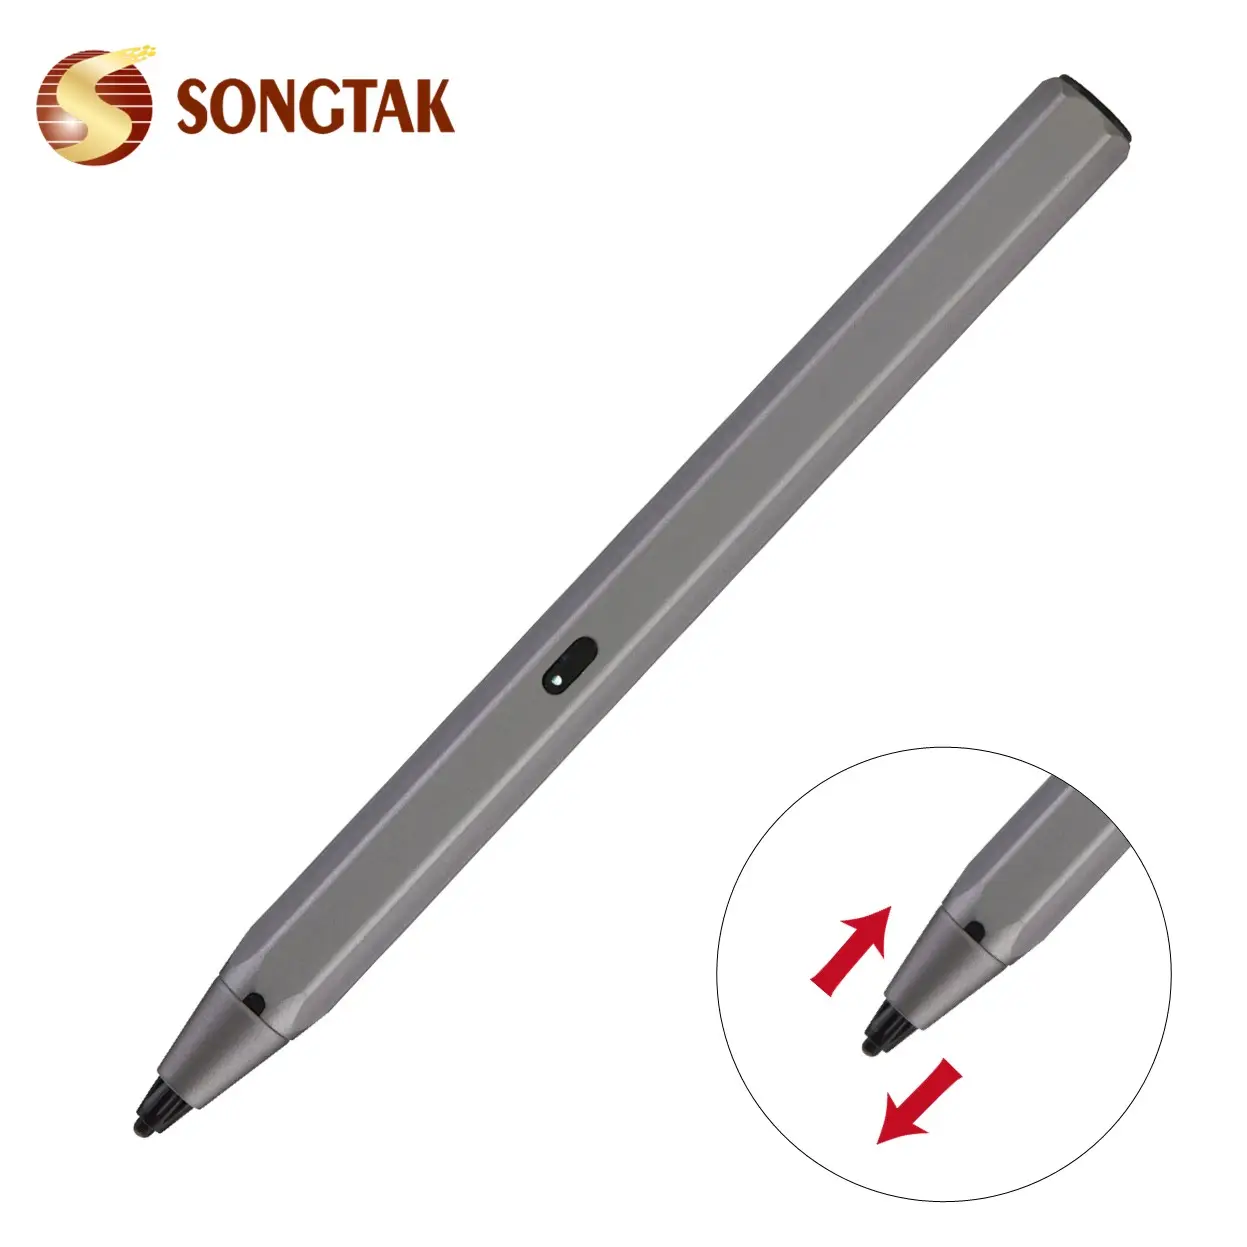 Premium Capacitive Touch Screen Stylus Universal For iPhone iPad Tablet without connecting